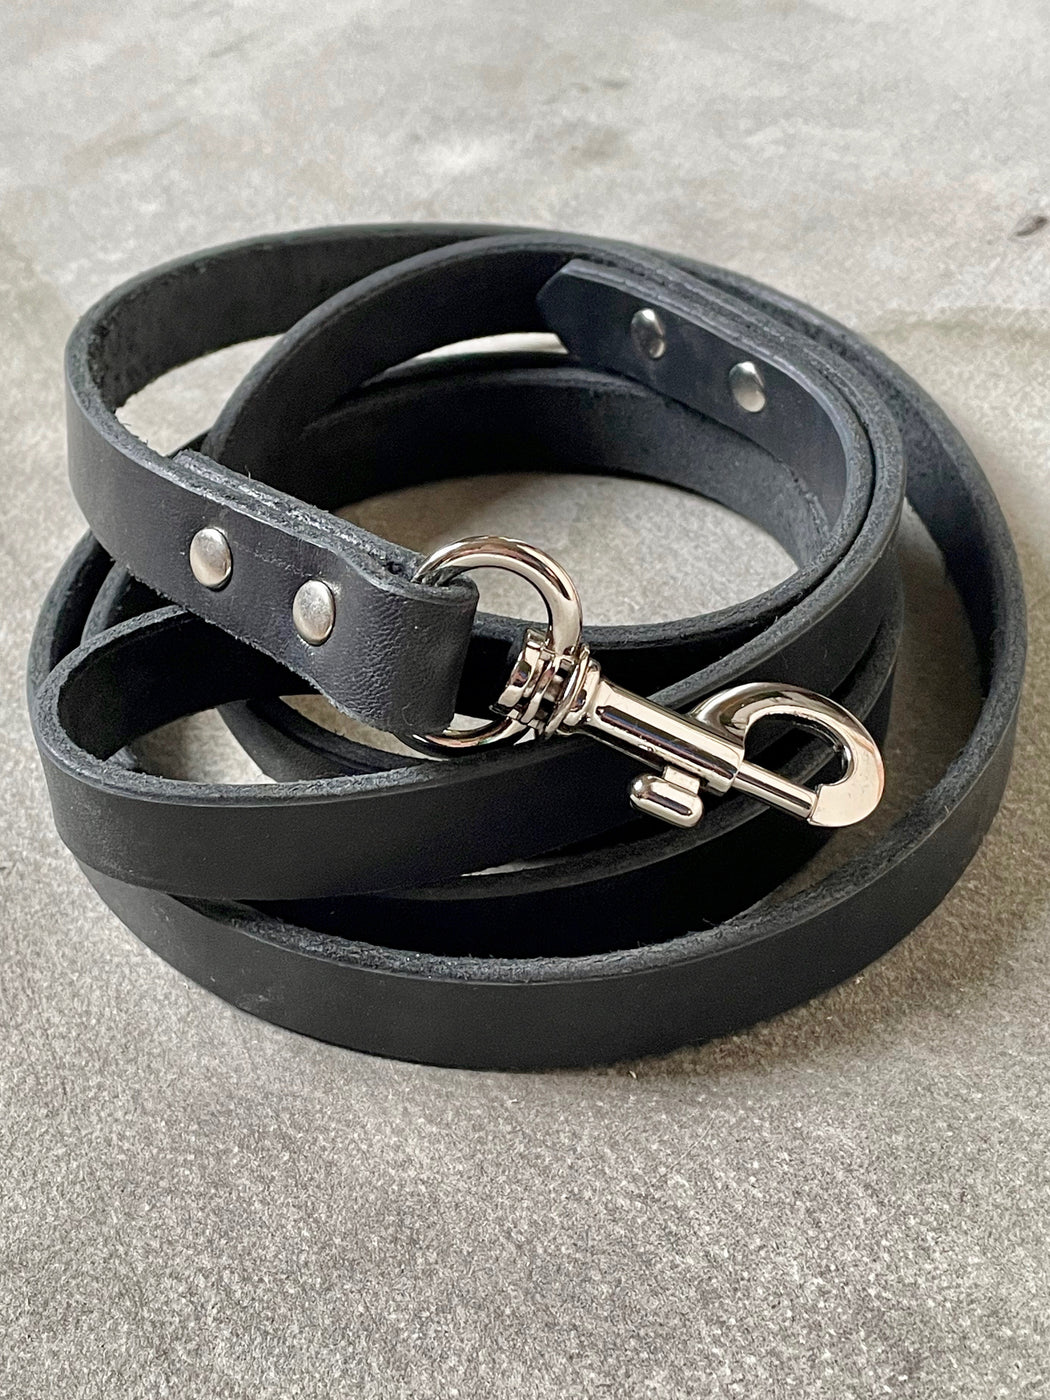 Black Leather Dog Leash by Pike Leather